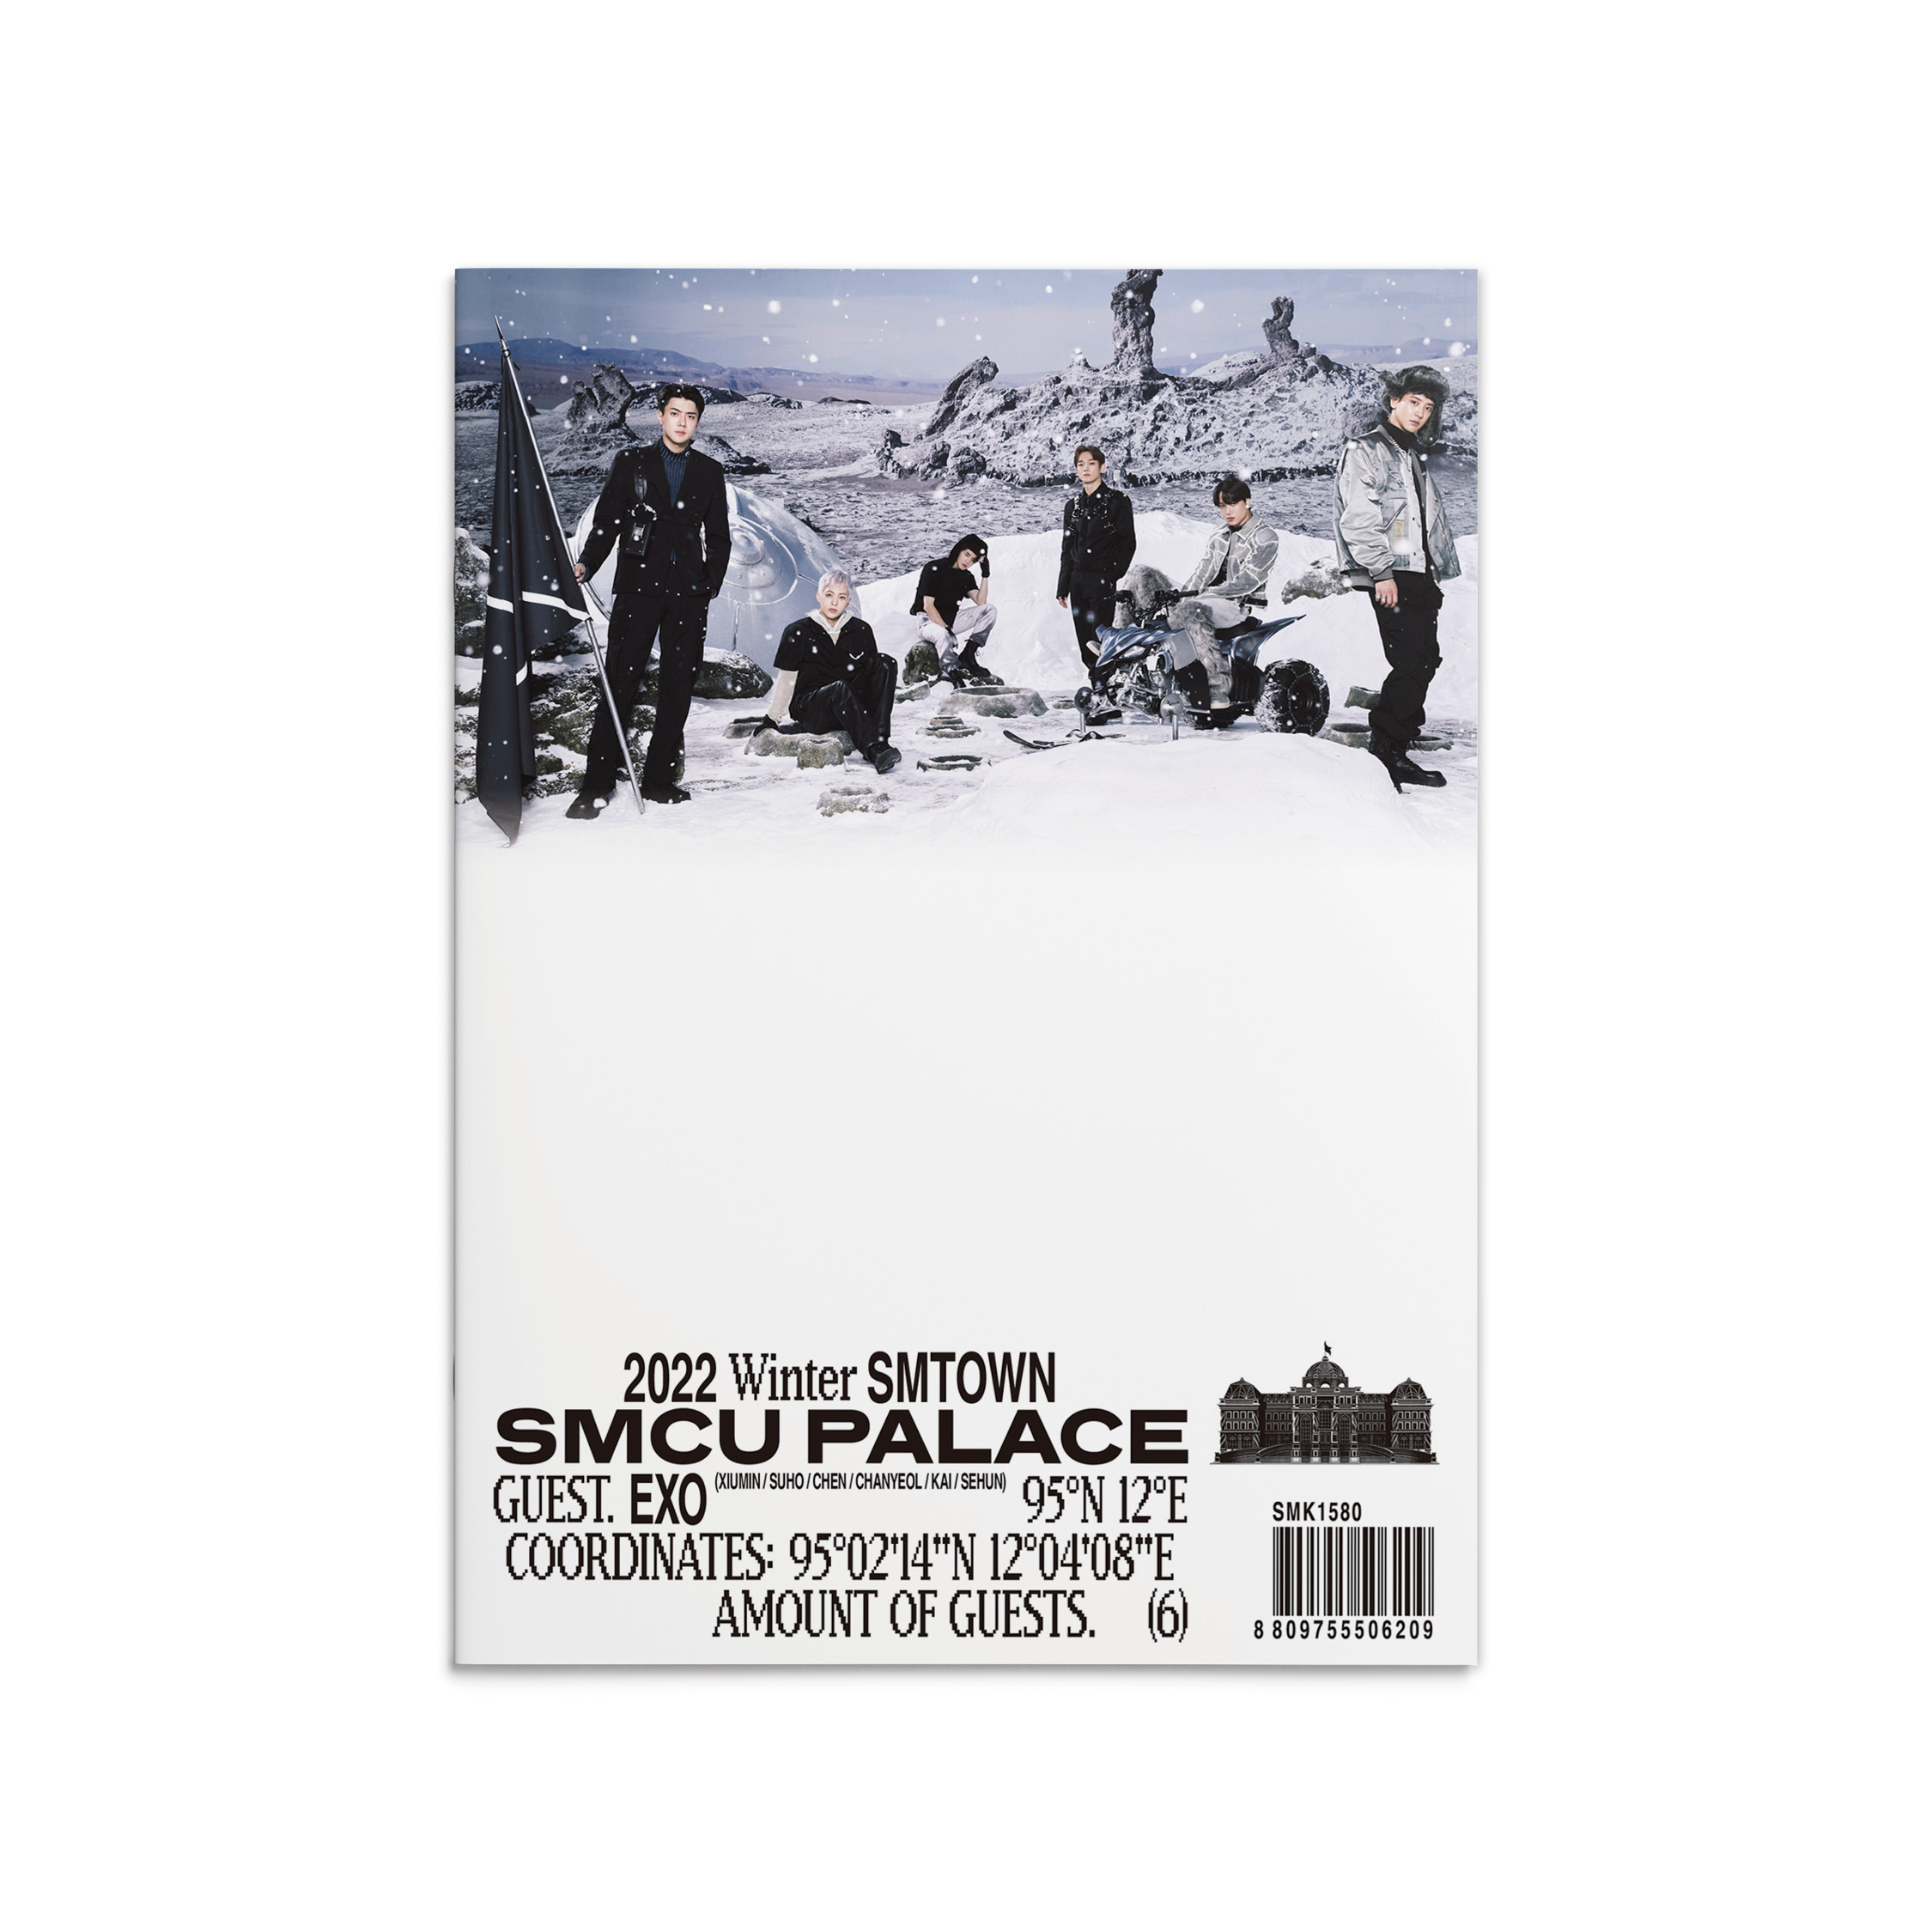 EXO 2022 Winter SMTOWN : SMCU PALACE (GUEST EXO)